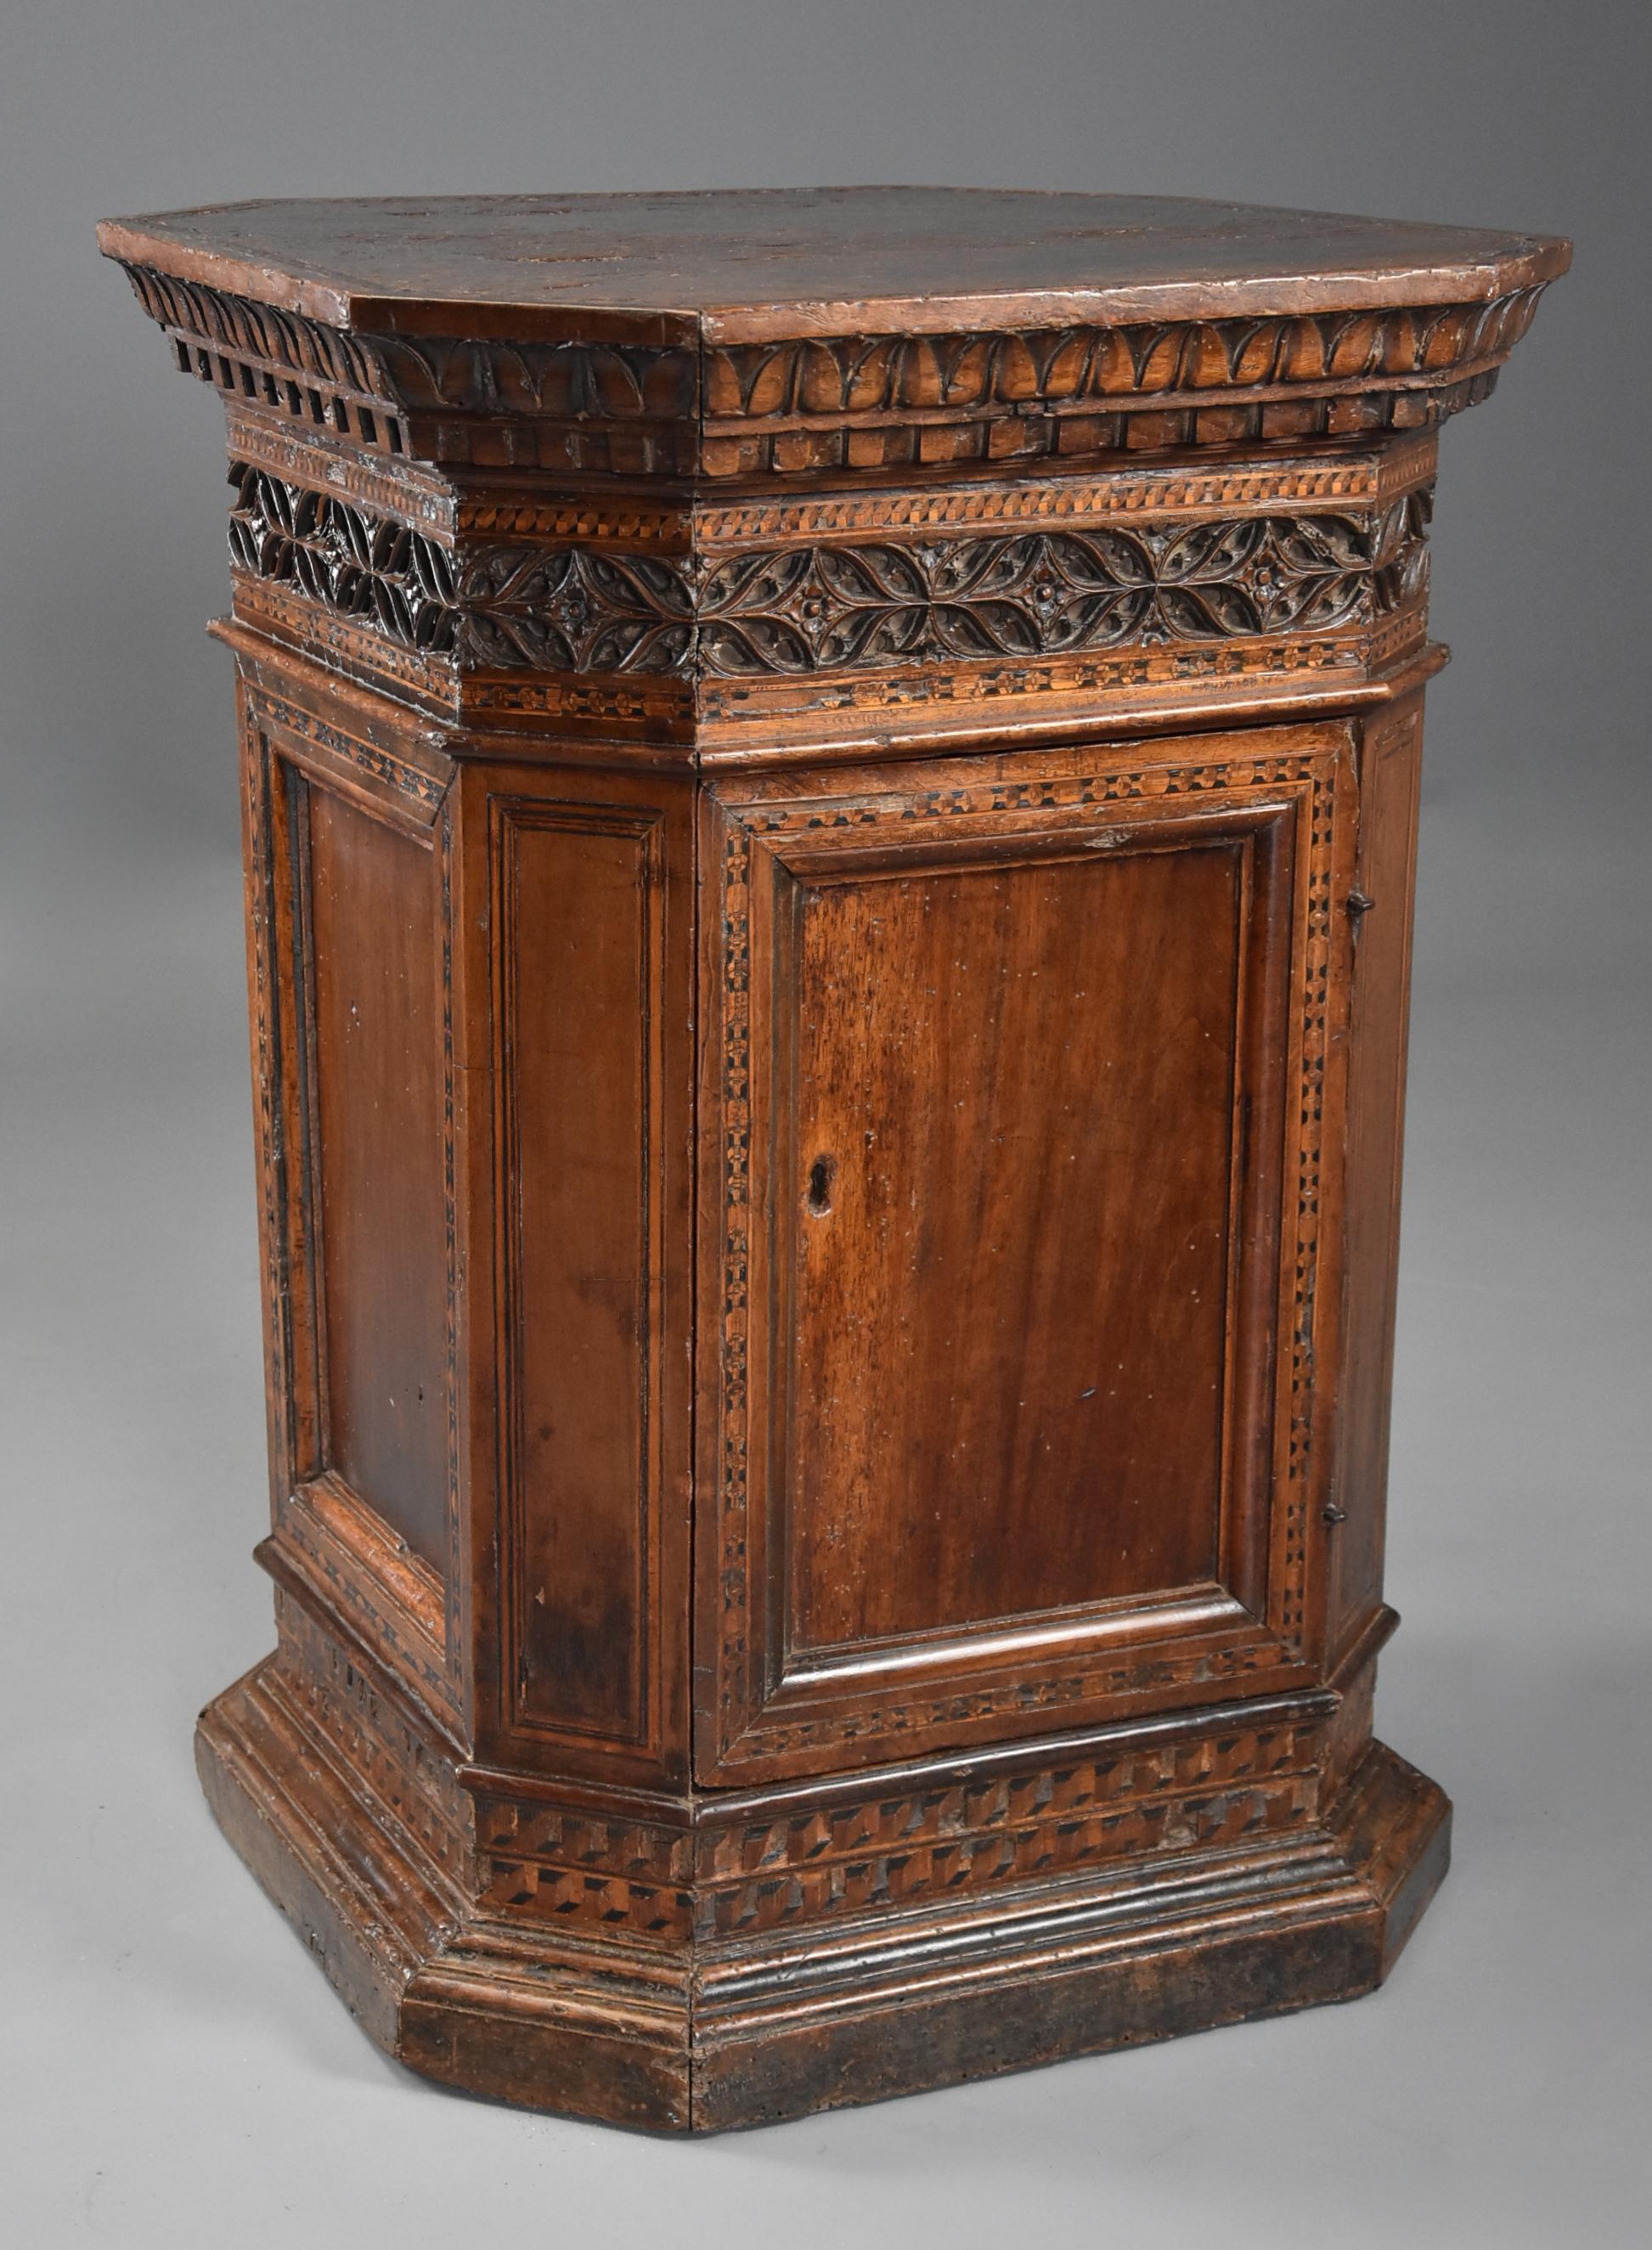 An extremely rare Tuscan mid-15th century (circa 1460) early Renaissance freestanding walnut sacristy cupboard, probably Florentine, in the form of a pedestal.

This rare and exceptional piece consists of a solid walnut top of square shape with